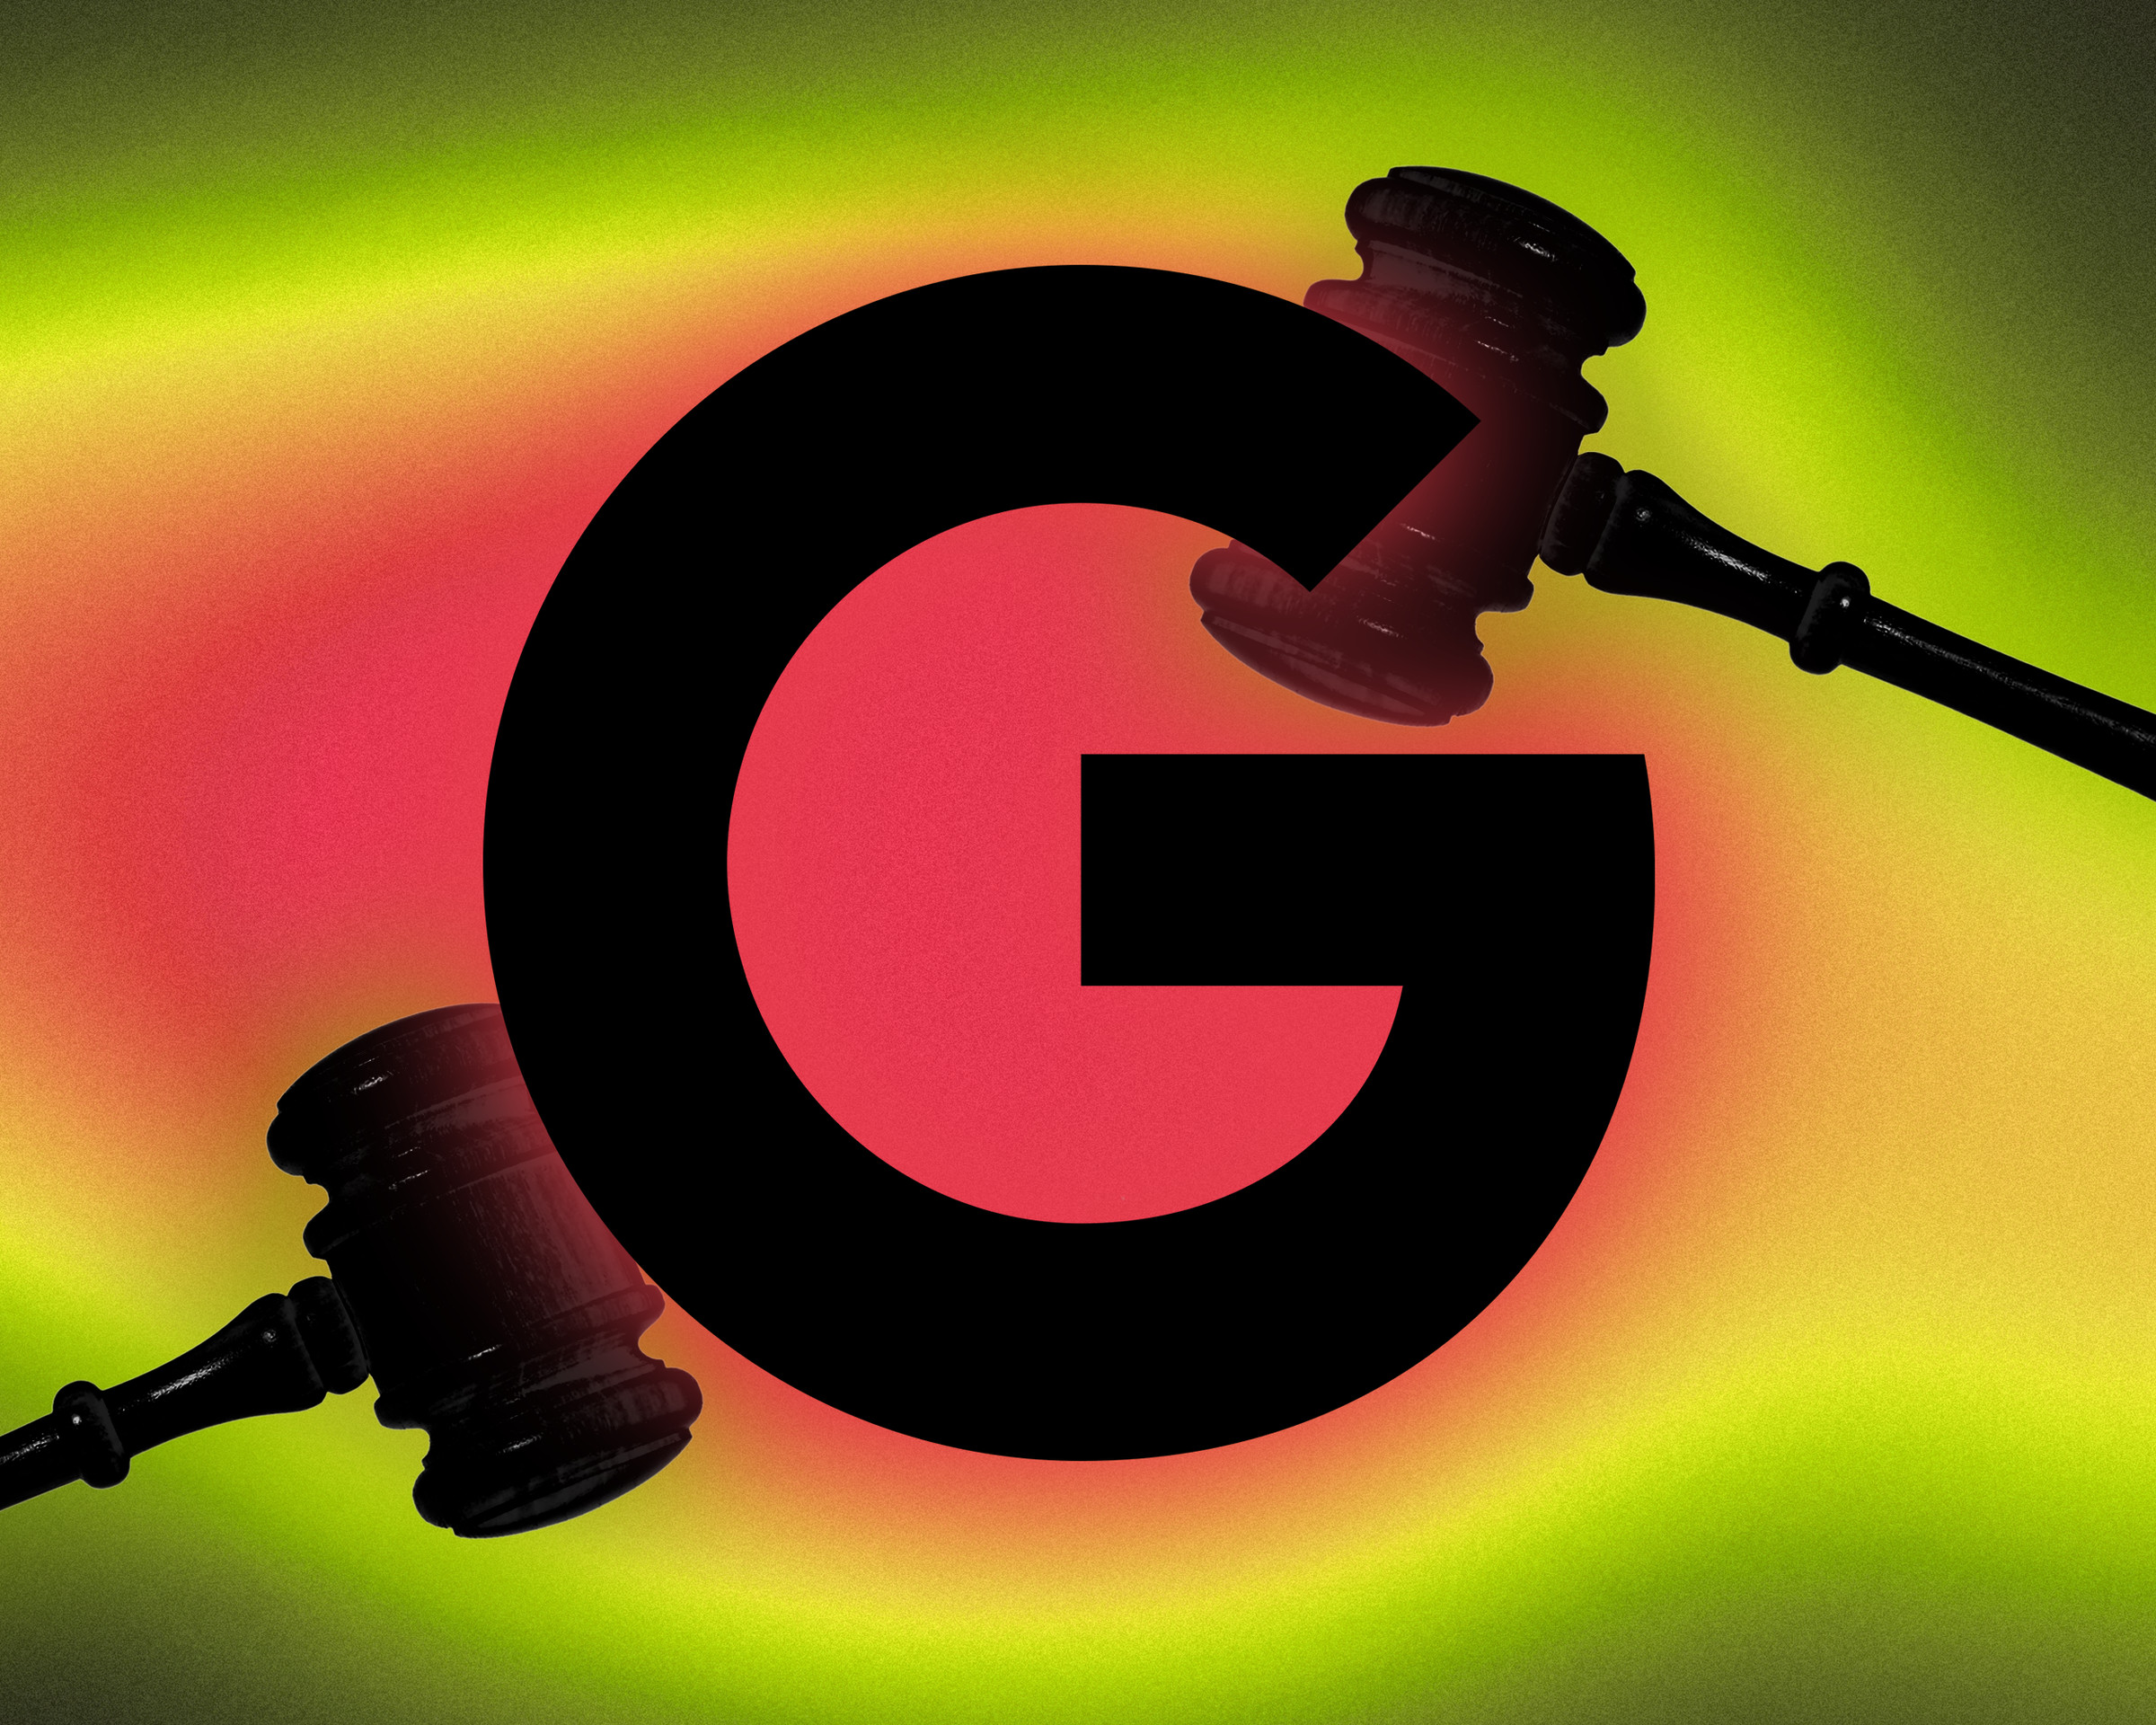 Photo illustration of the Google logo with gavels in the background